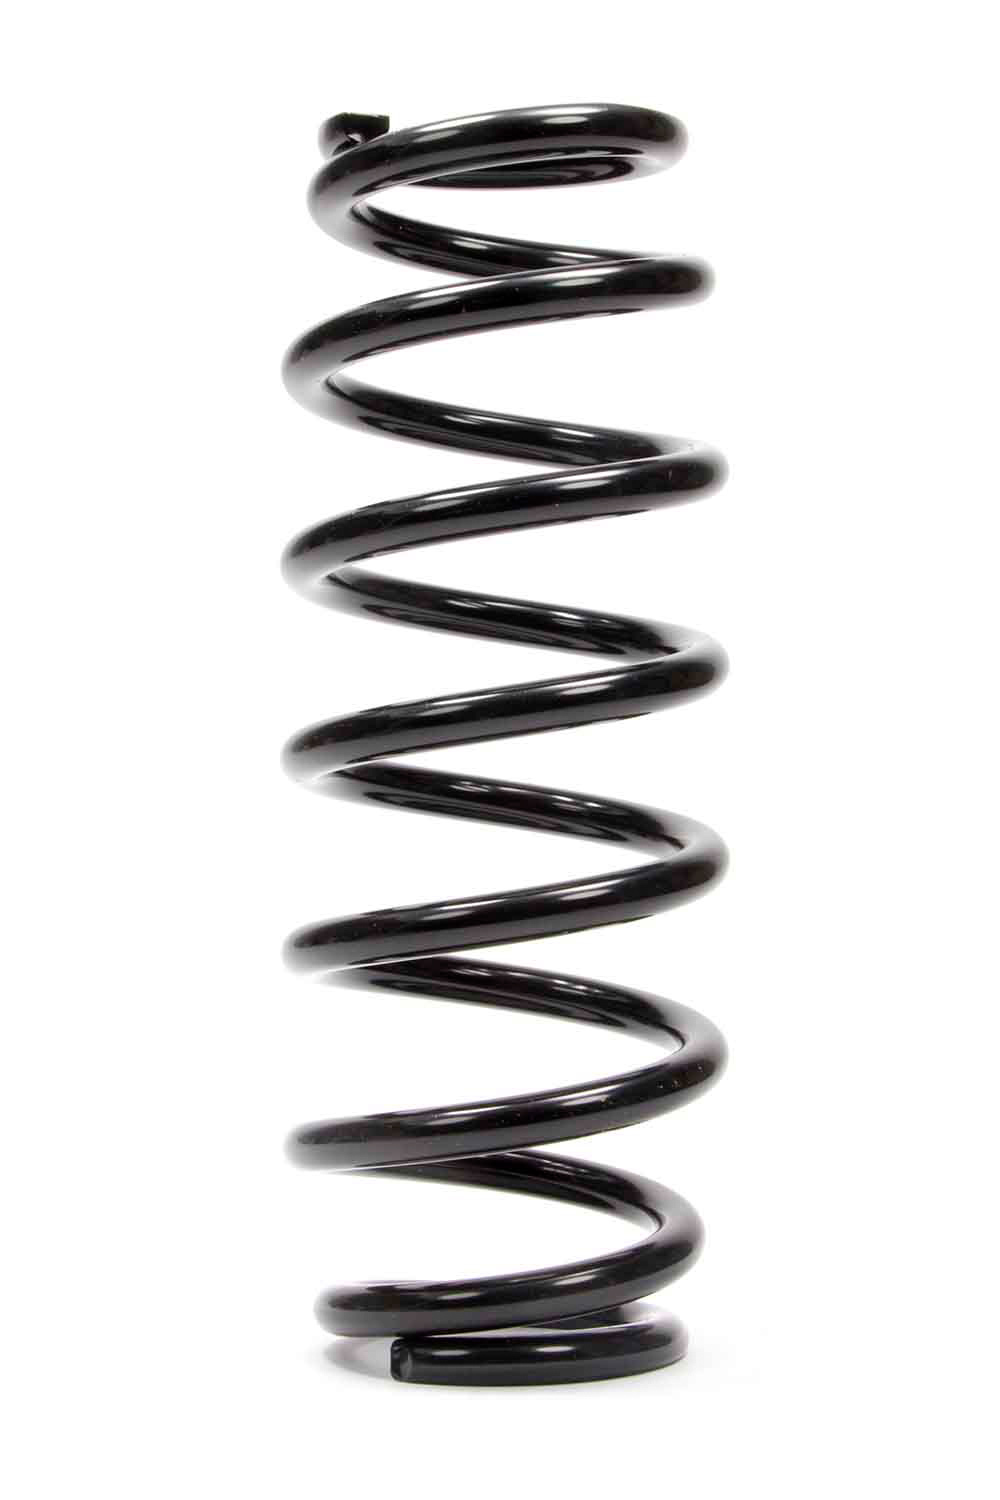 Integra Shocks 310-2512-250DLC Coil Spring, DLC Series, Coil-Over, 2.625 in ID, 12.000 in Length, 250 lb/in Spring Rate, Steel, Black Powder Coat, Each